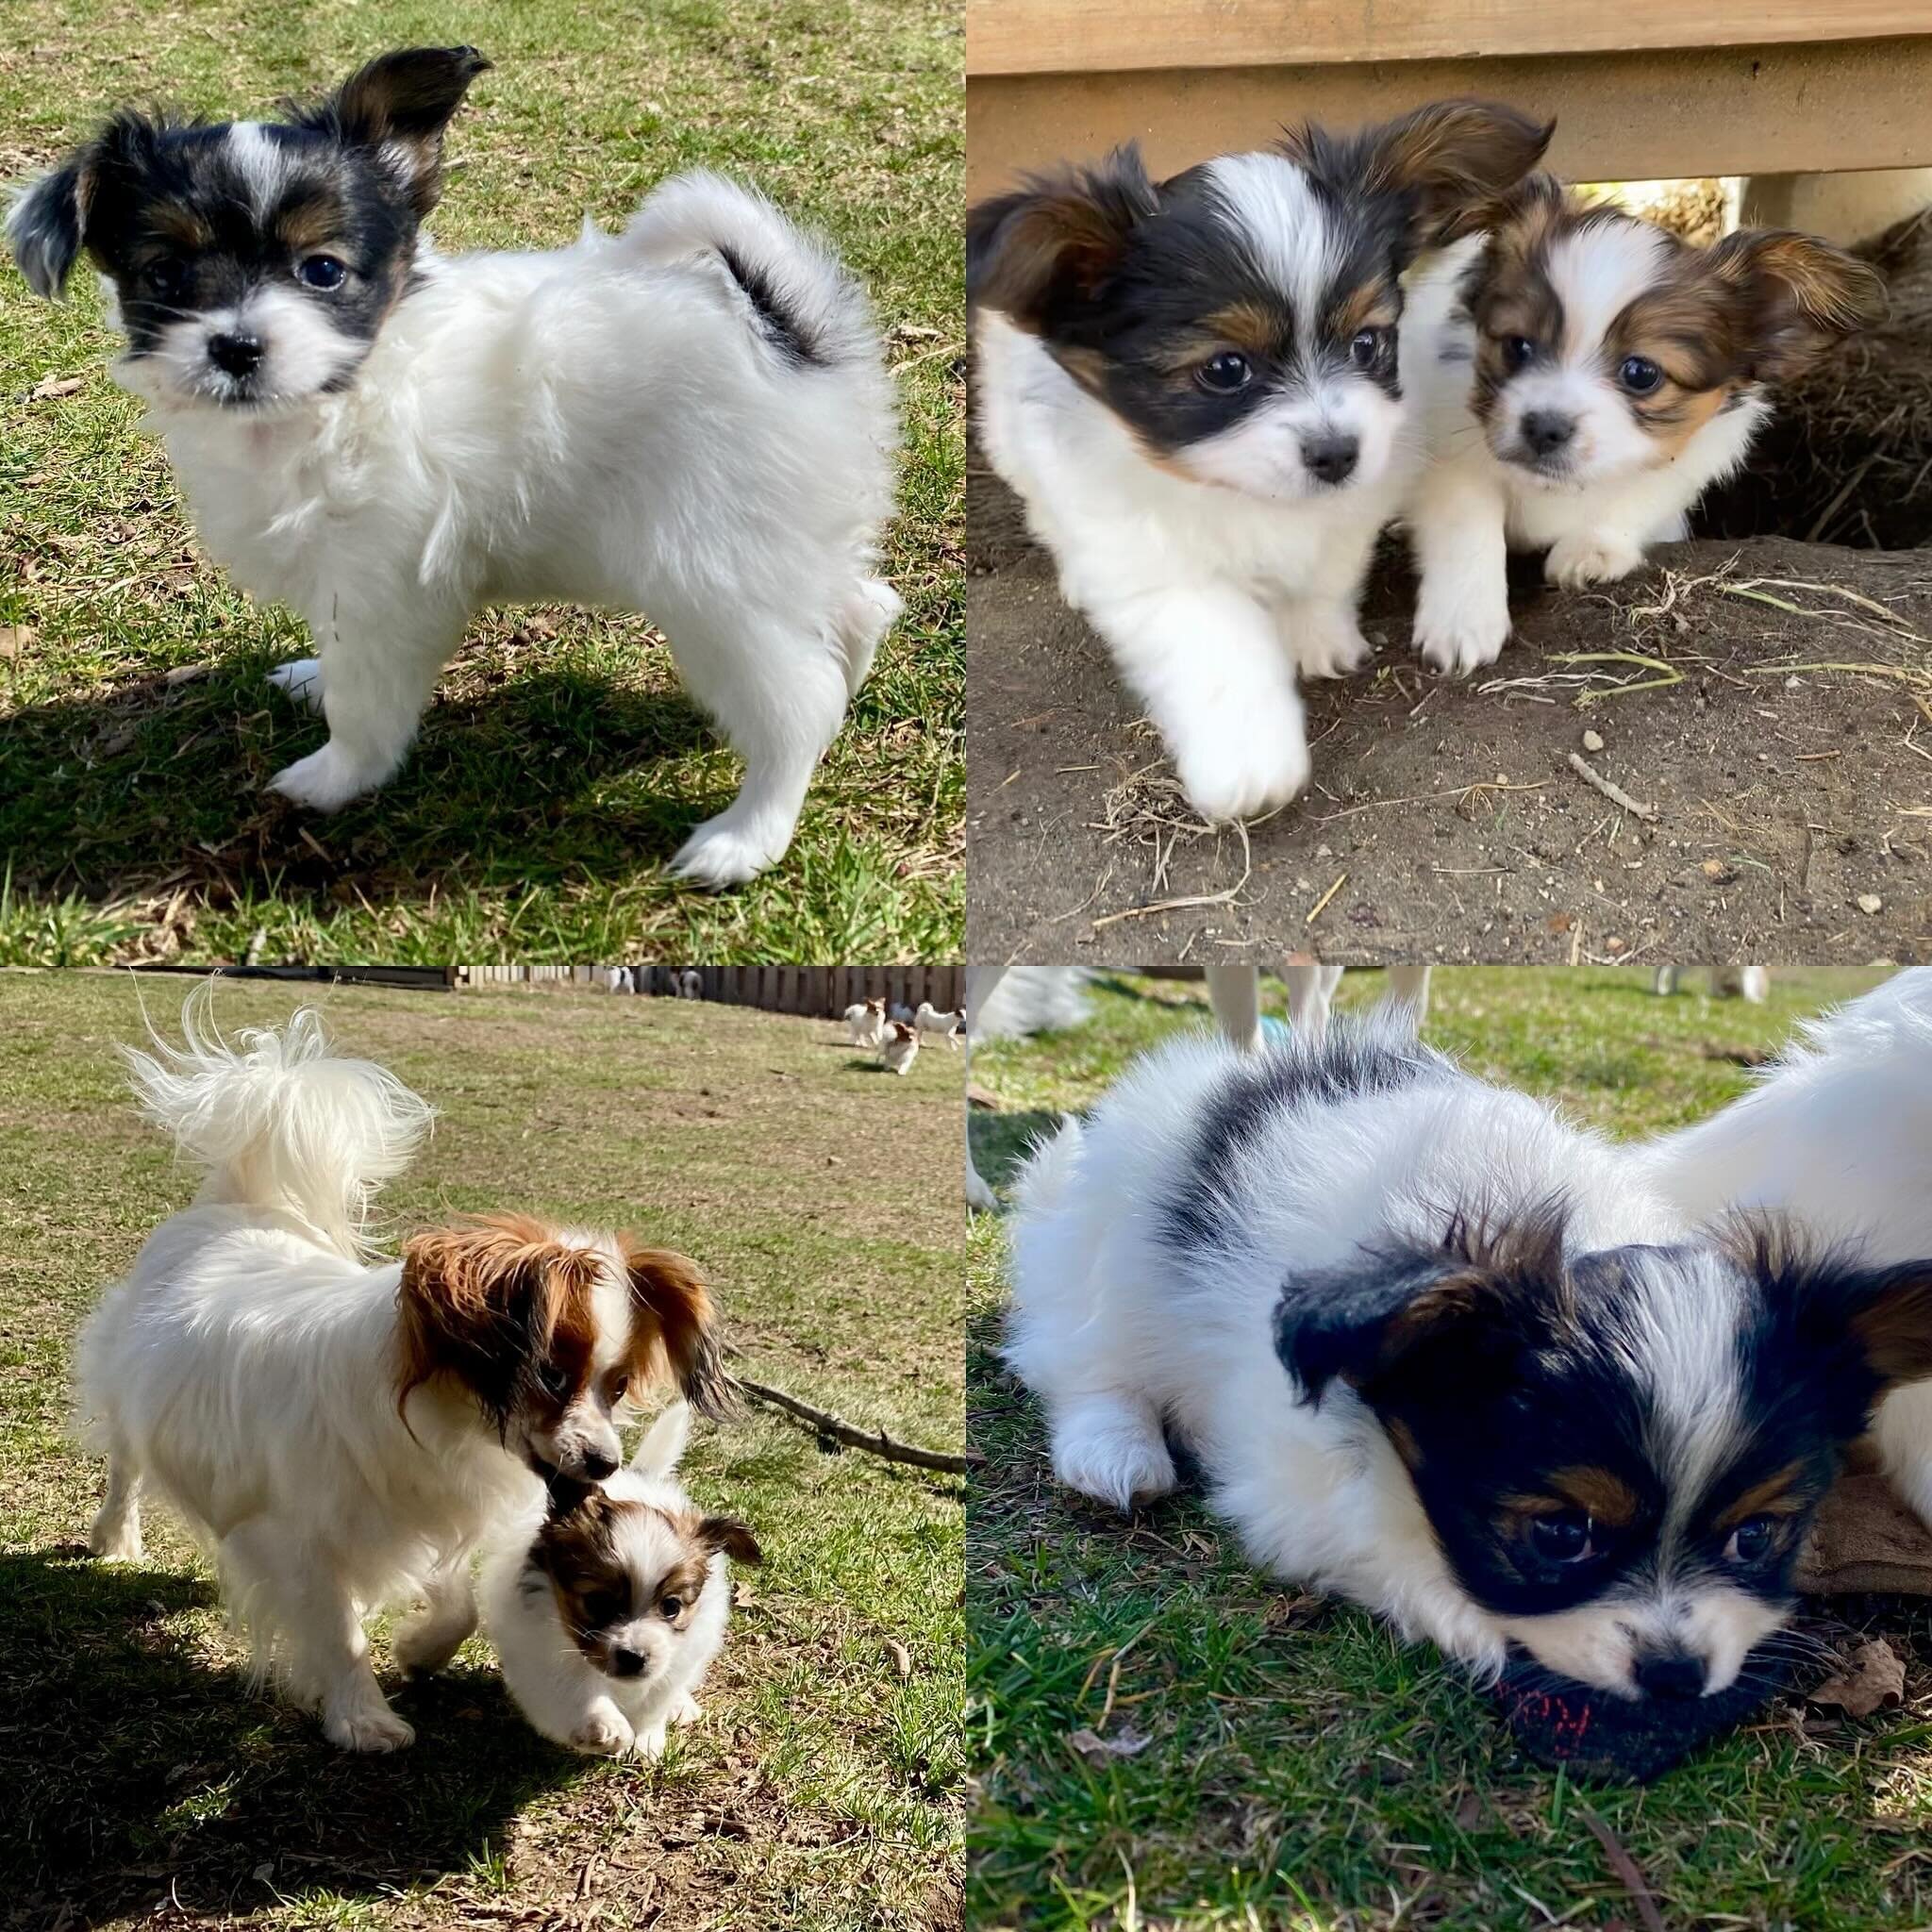 Some cute kids, all reserved :) #papillon #papillons #papillonsofinstagram #papillonlove #papillondog #papillonpuppy #puppylove #puppiesofinstagram #puppygram #pupper #puppylife #sablewings